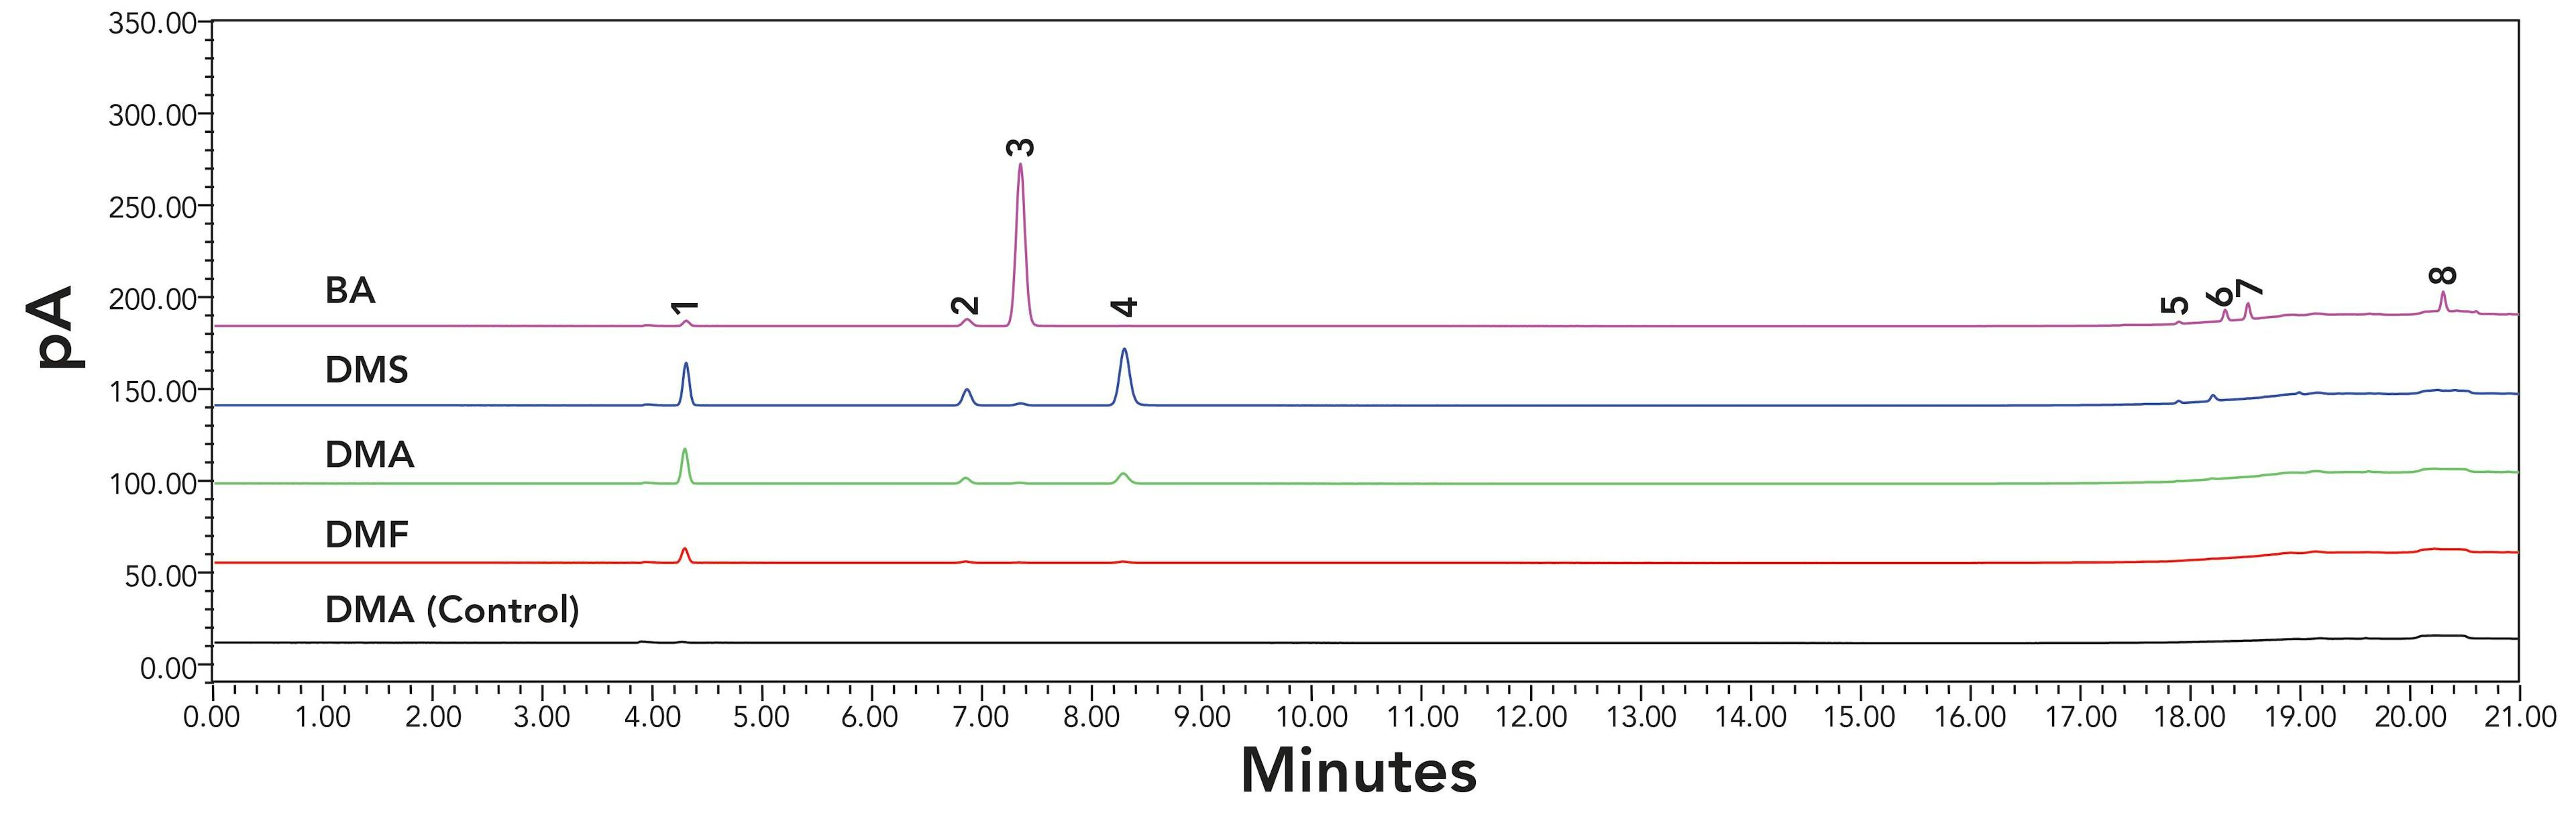 Figure 3: The chromatograms (0–21 minutes) of sonicated solvents obtained on HS-GC-FID systems with HP-PLOT/Q column. Lines from bottom to top are the non-sonicated DMA as control, the sonicated DMF, sonicated DMA, sonicated DMS, and sonicated BA, respectively. Peak names were: 1: methane; 2: ethylene; 3: acetylene; 4: ethane; 5: propylene; 6: propane; 7: propyne; 8: 1-buten-3-yne.